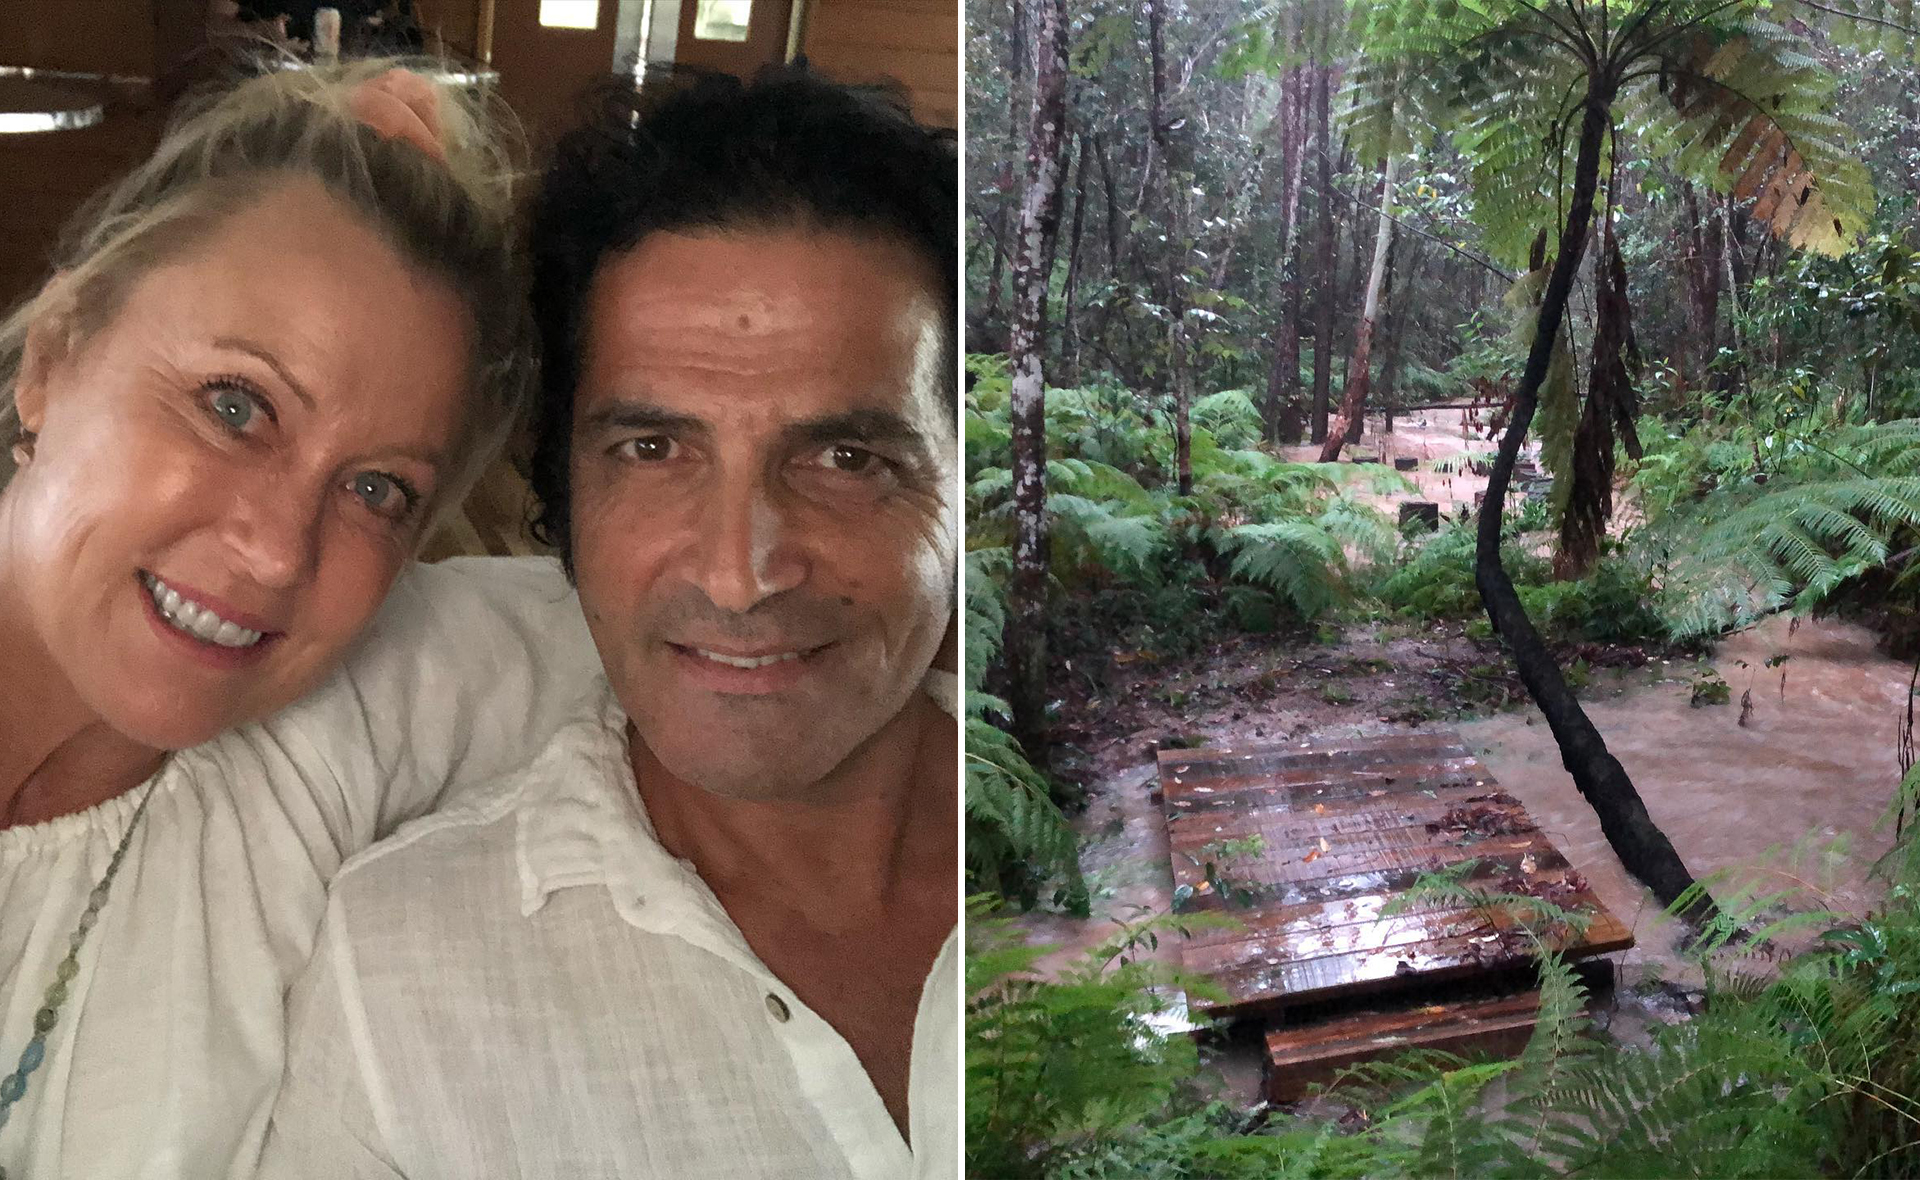 Lisa Curry is left stranded due to deadly Queensland floods: “It’s much more powerful than you think”